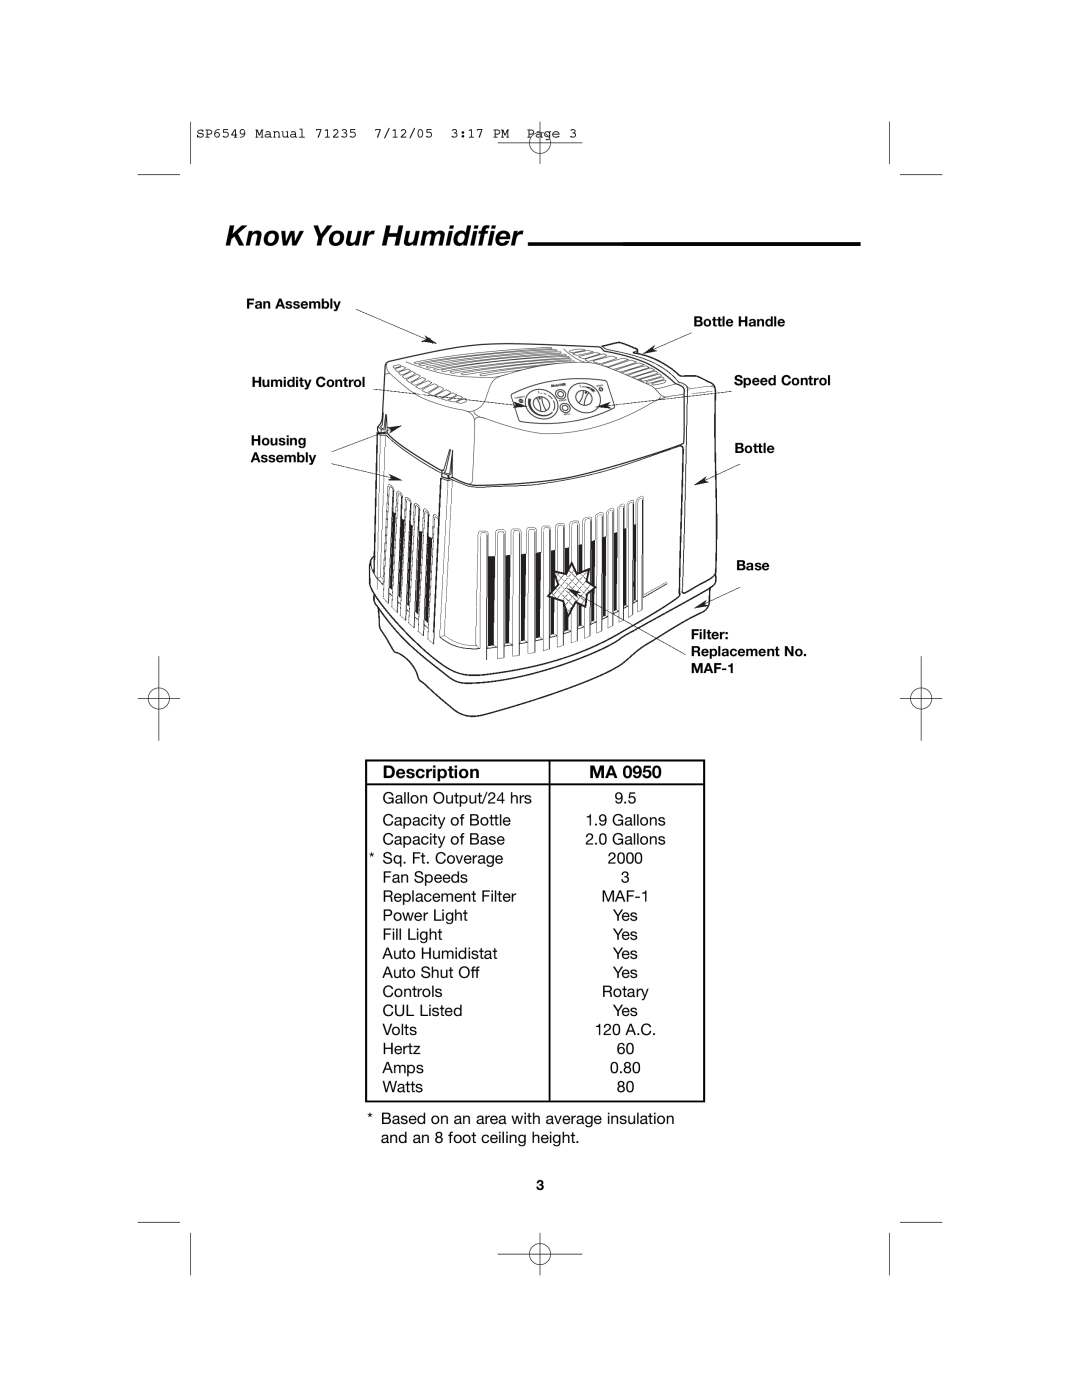 MoistAir MA 0950 owner manual Know Your Humidifier, Description 